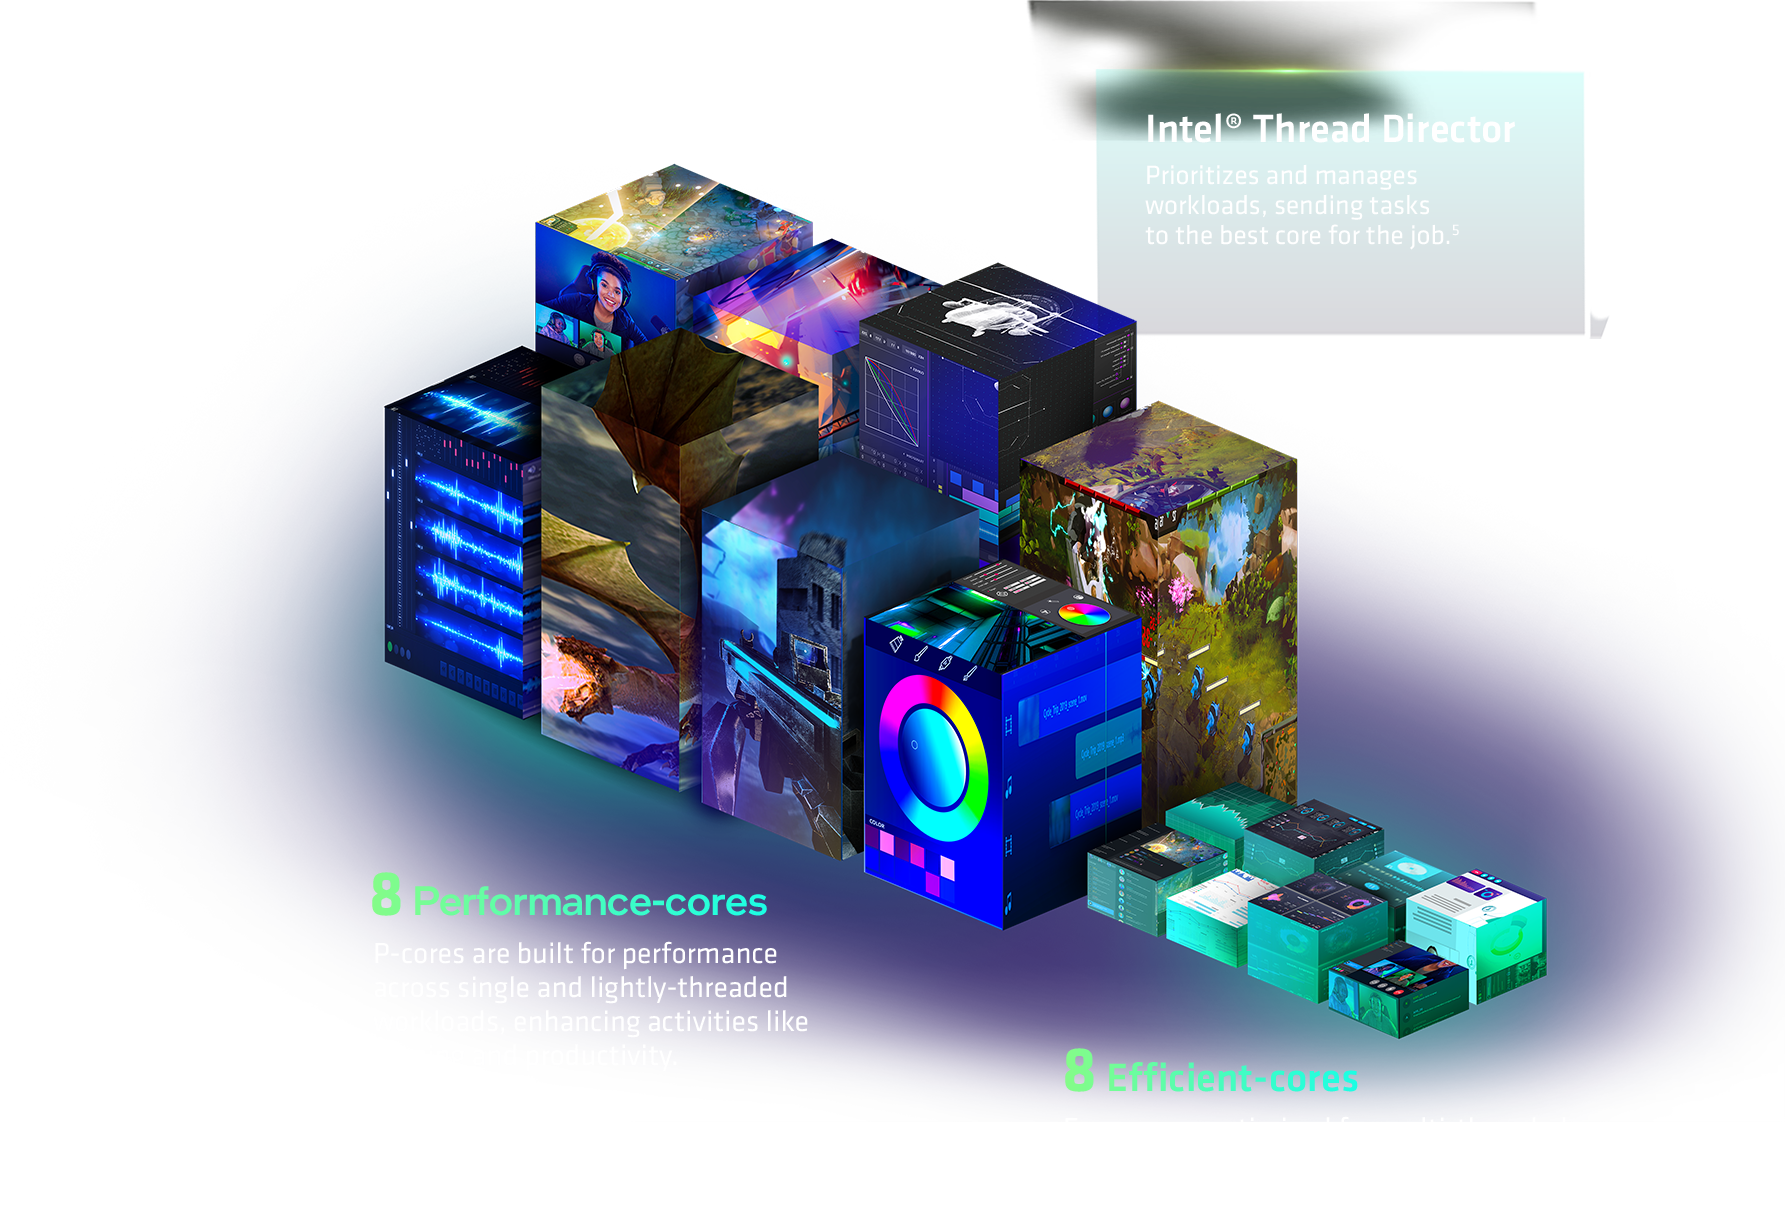 Intel’s new performance hybrid architecture integrates two core families into a single CPU